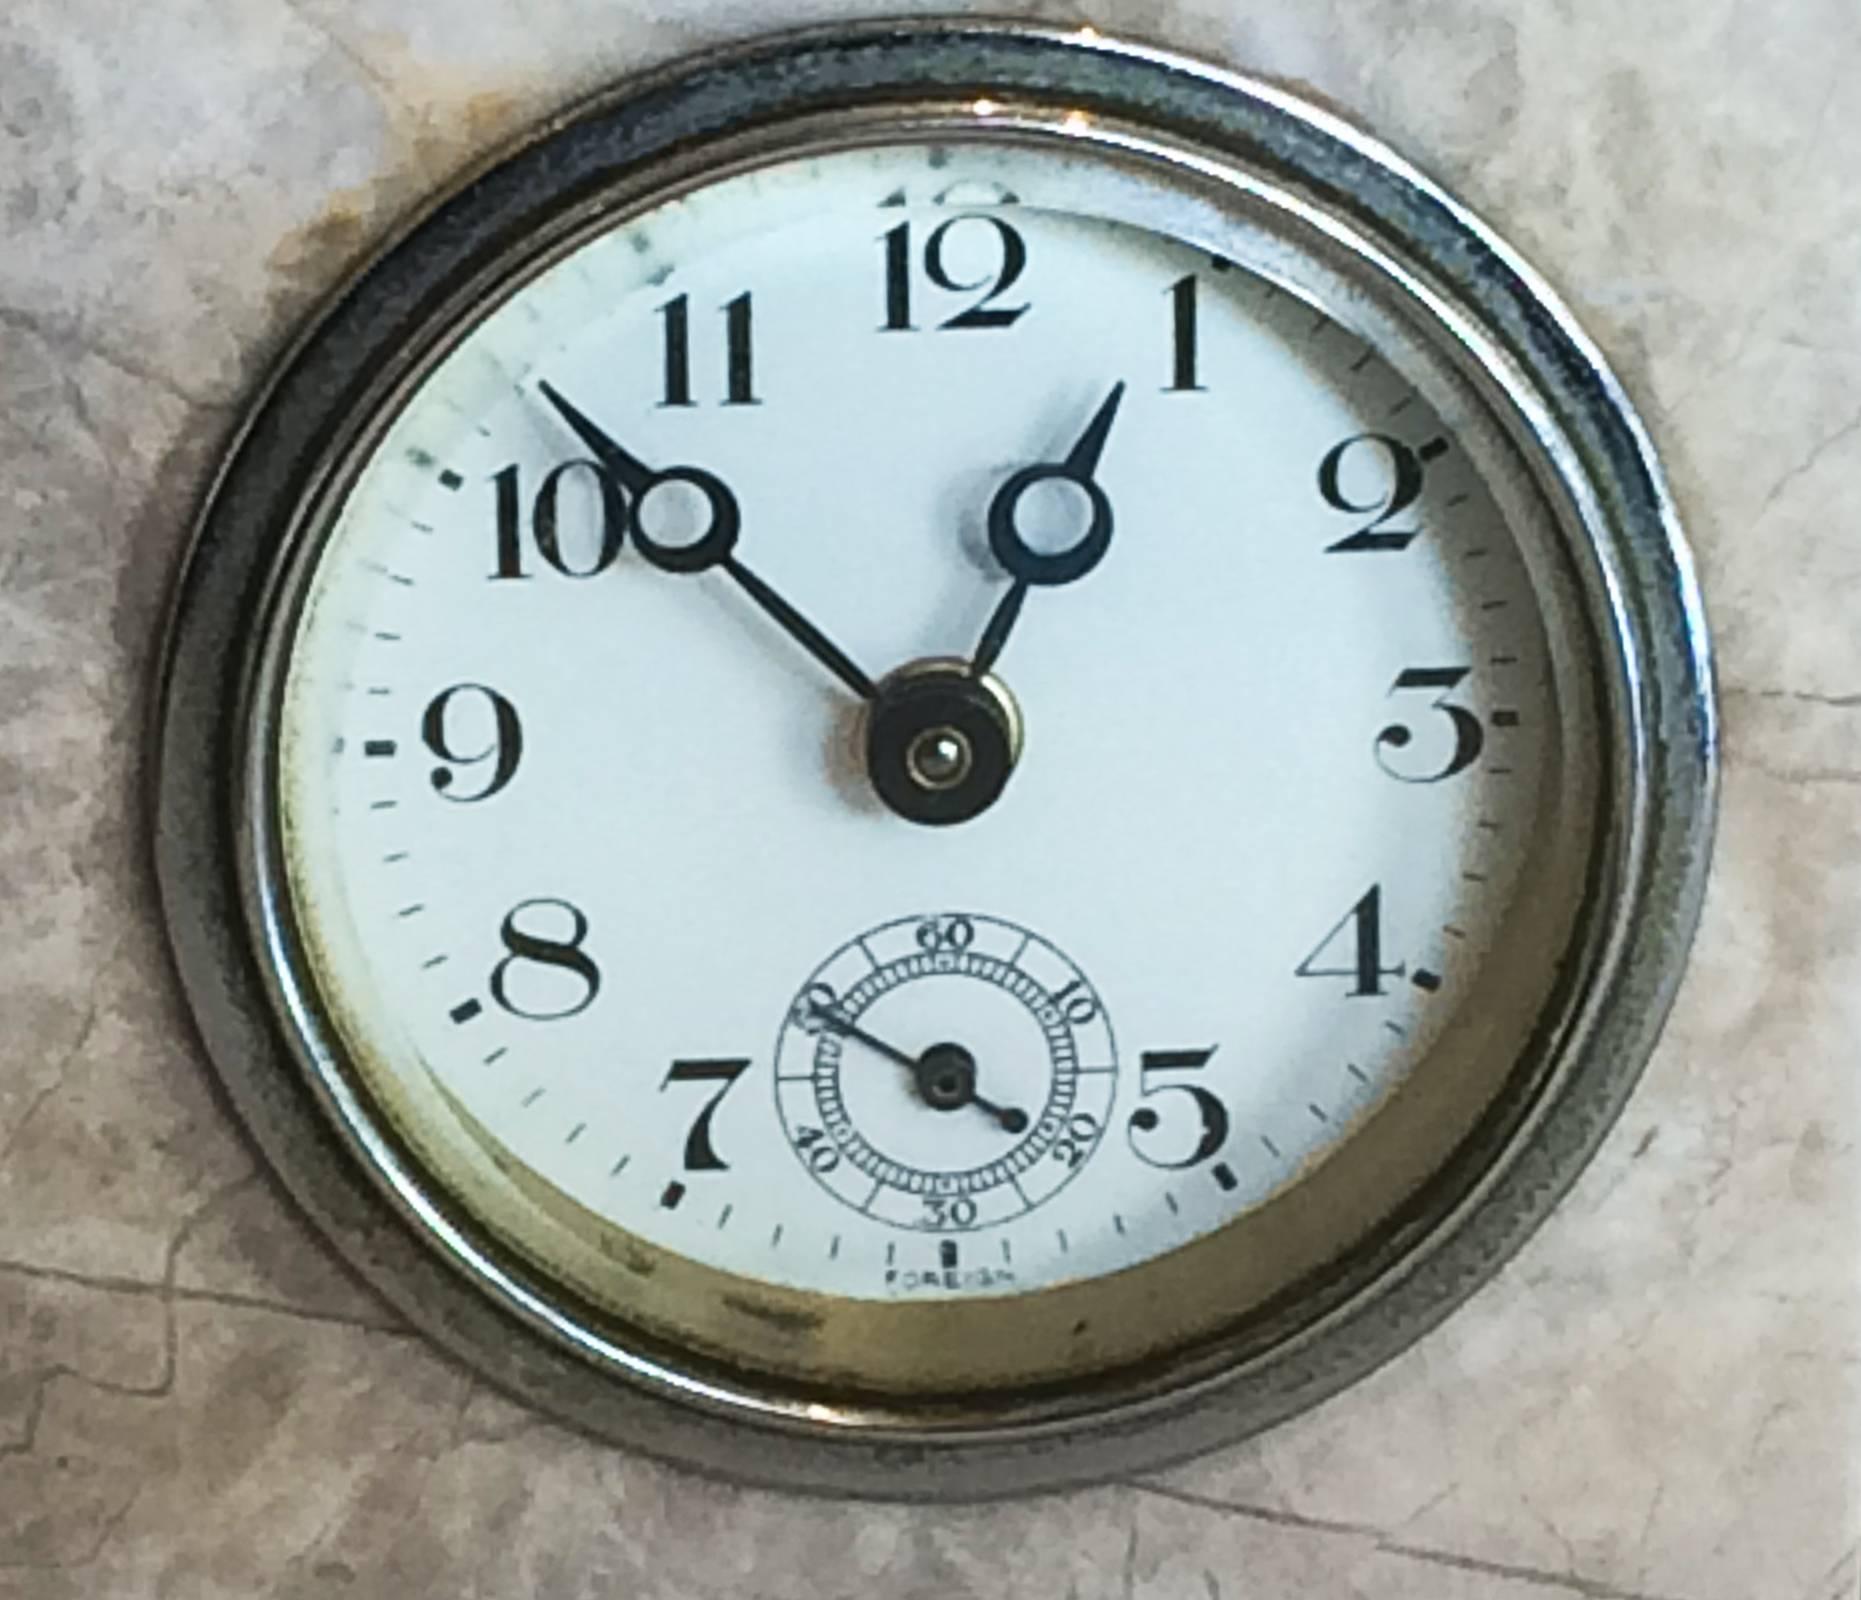 Ultra, Art Deco clock in geometric black and white marble design with white enamel face, arabic numerals in black and also minute dial. Marked “FOREIGN” to both lower front and rear dial areas. Probably German workings and post 1915 for English